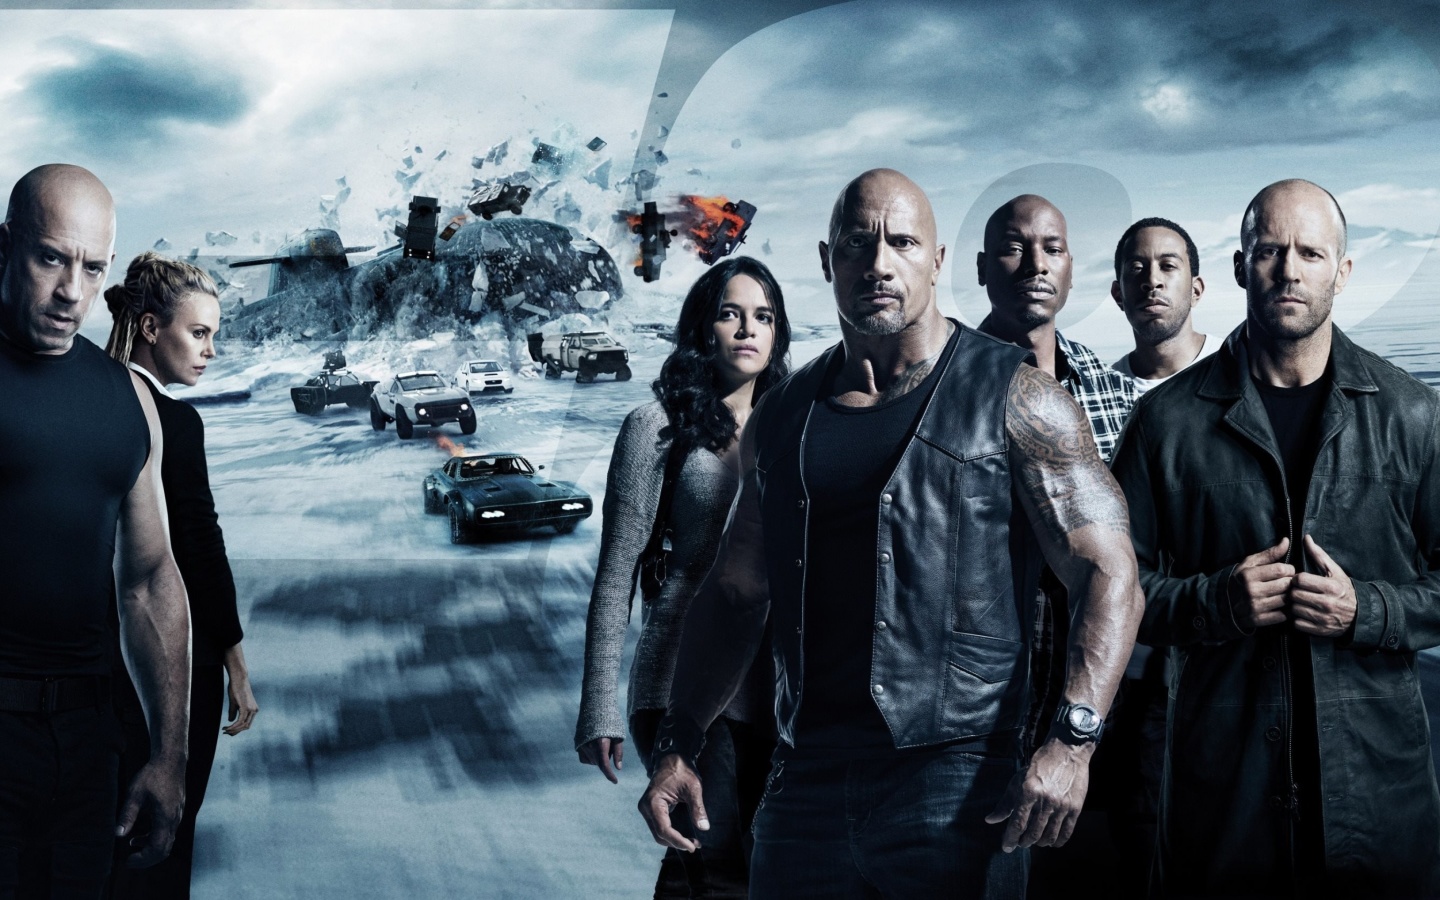 The Fate of the Furious with Vin Diesel, Dwayne Johnson, Charlize Theron wallpaper 1440x900